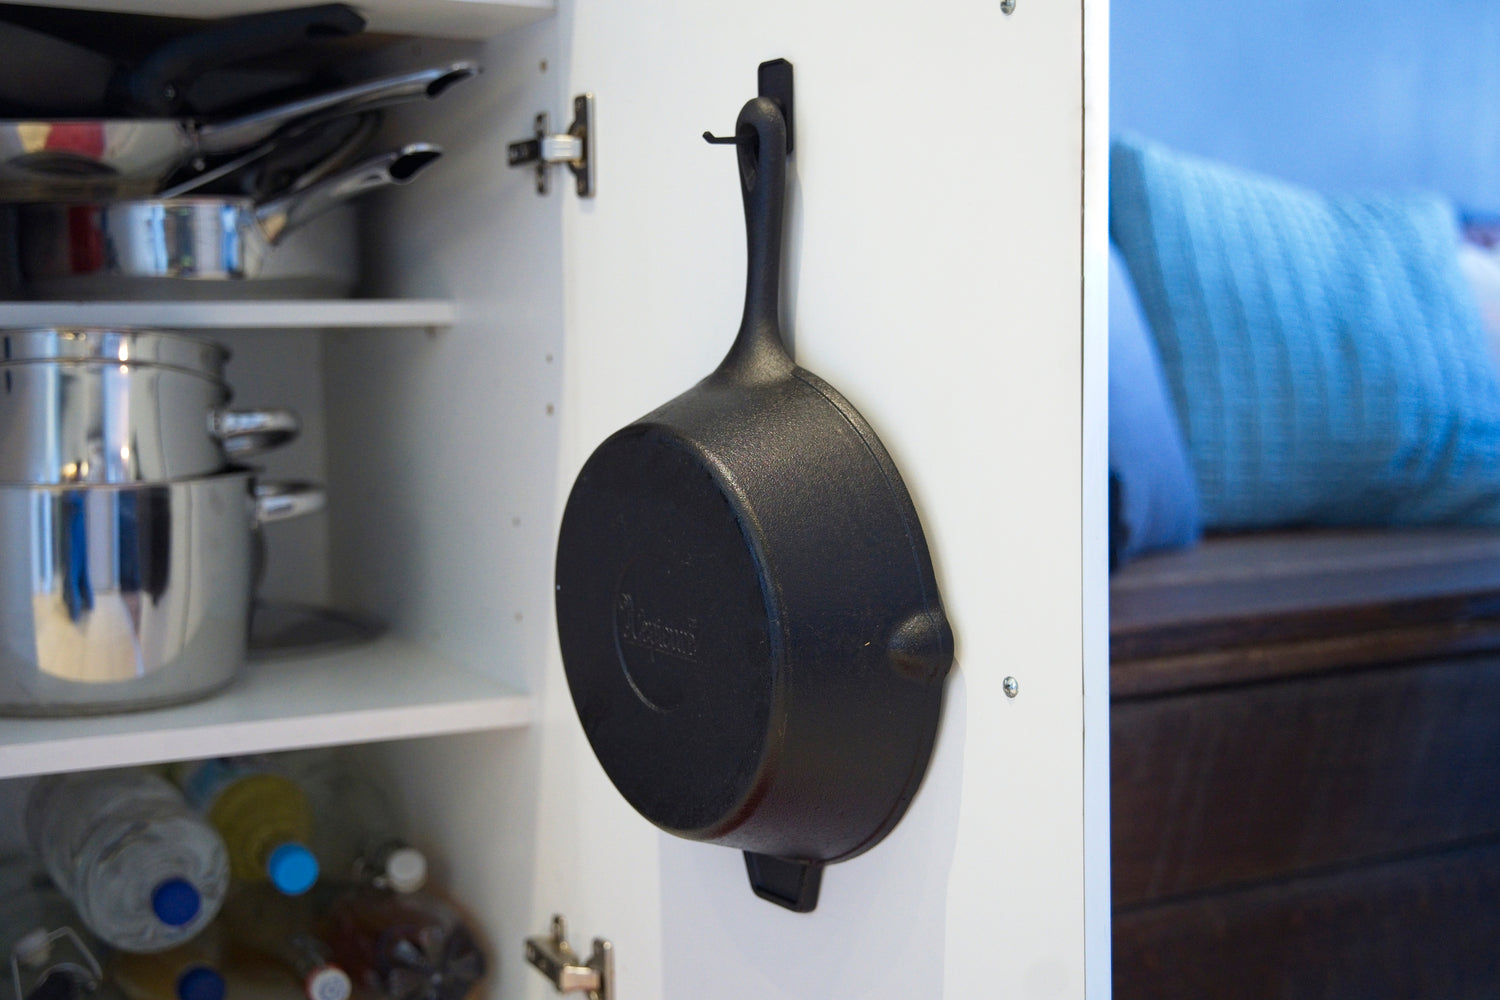 Hooks for the kitchen, Clever Hooks For holding almost anything, Superhooks